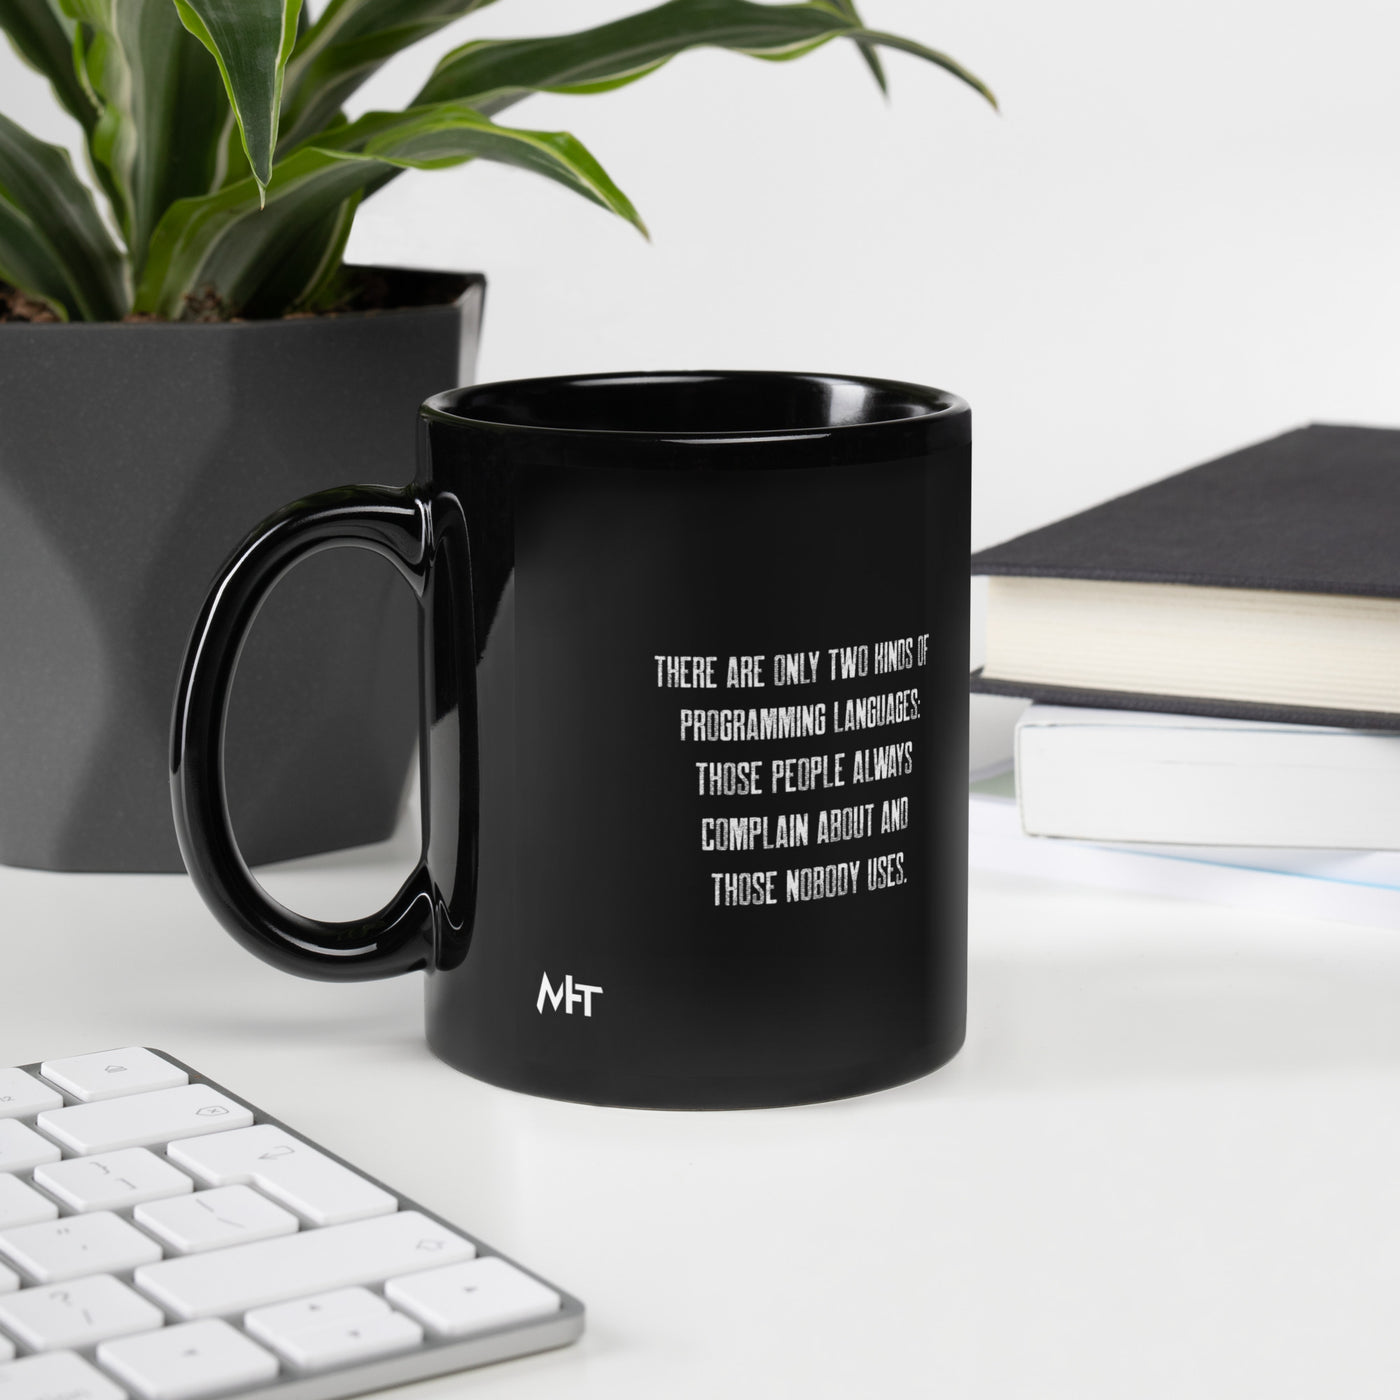 There are only two kinds of programming languages those people always complain about and those nobody uses V1 - Black Glossy Mug